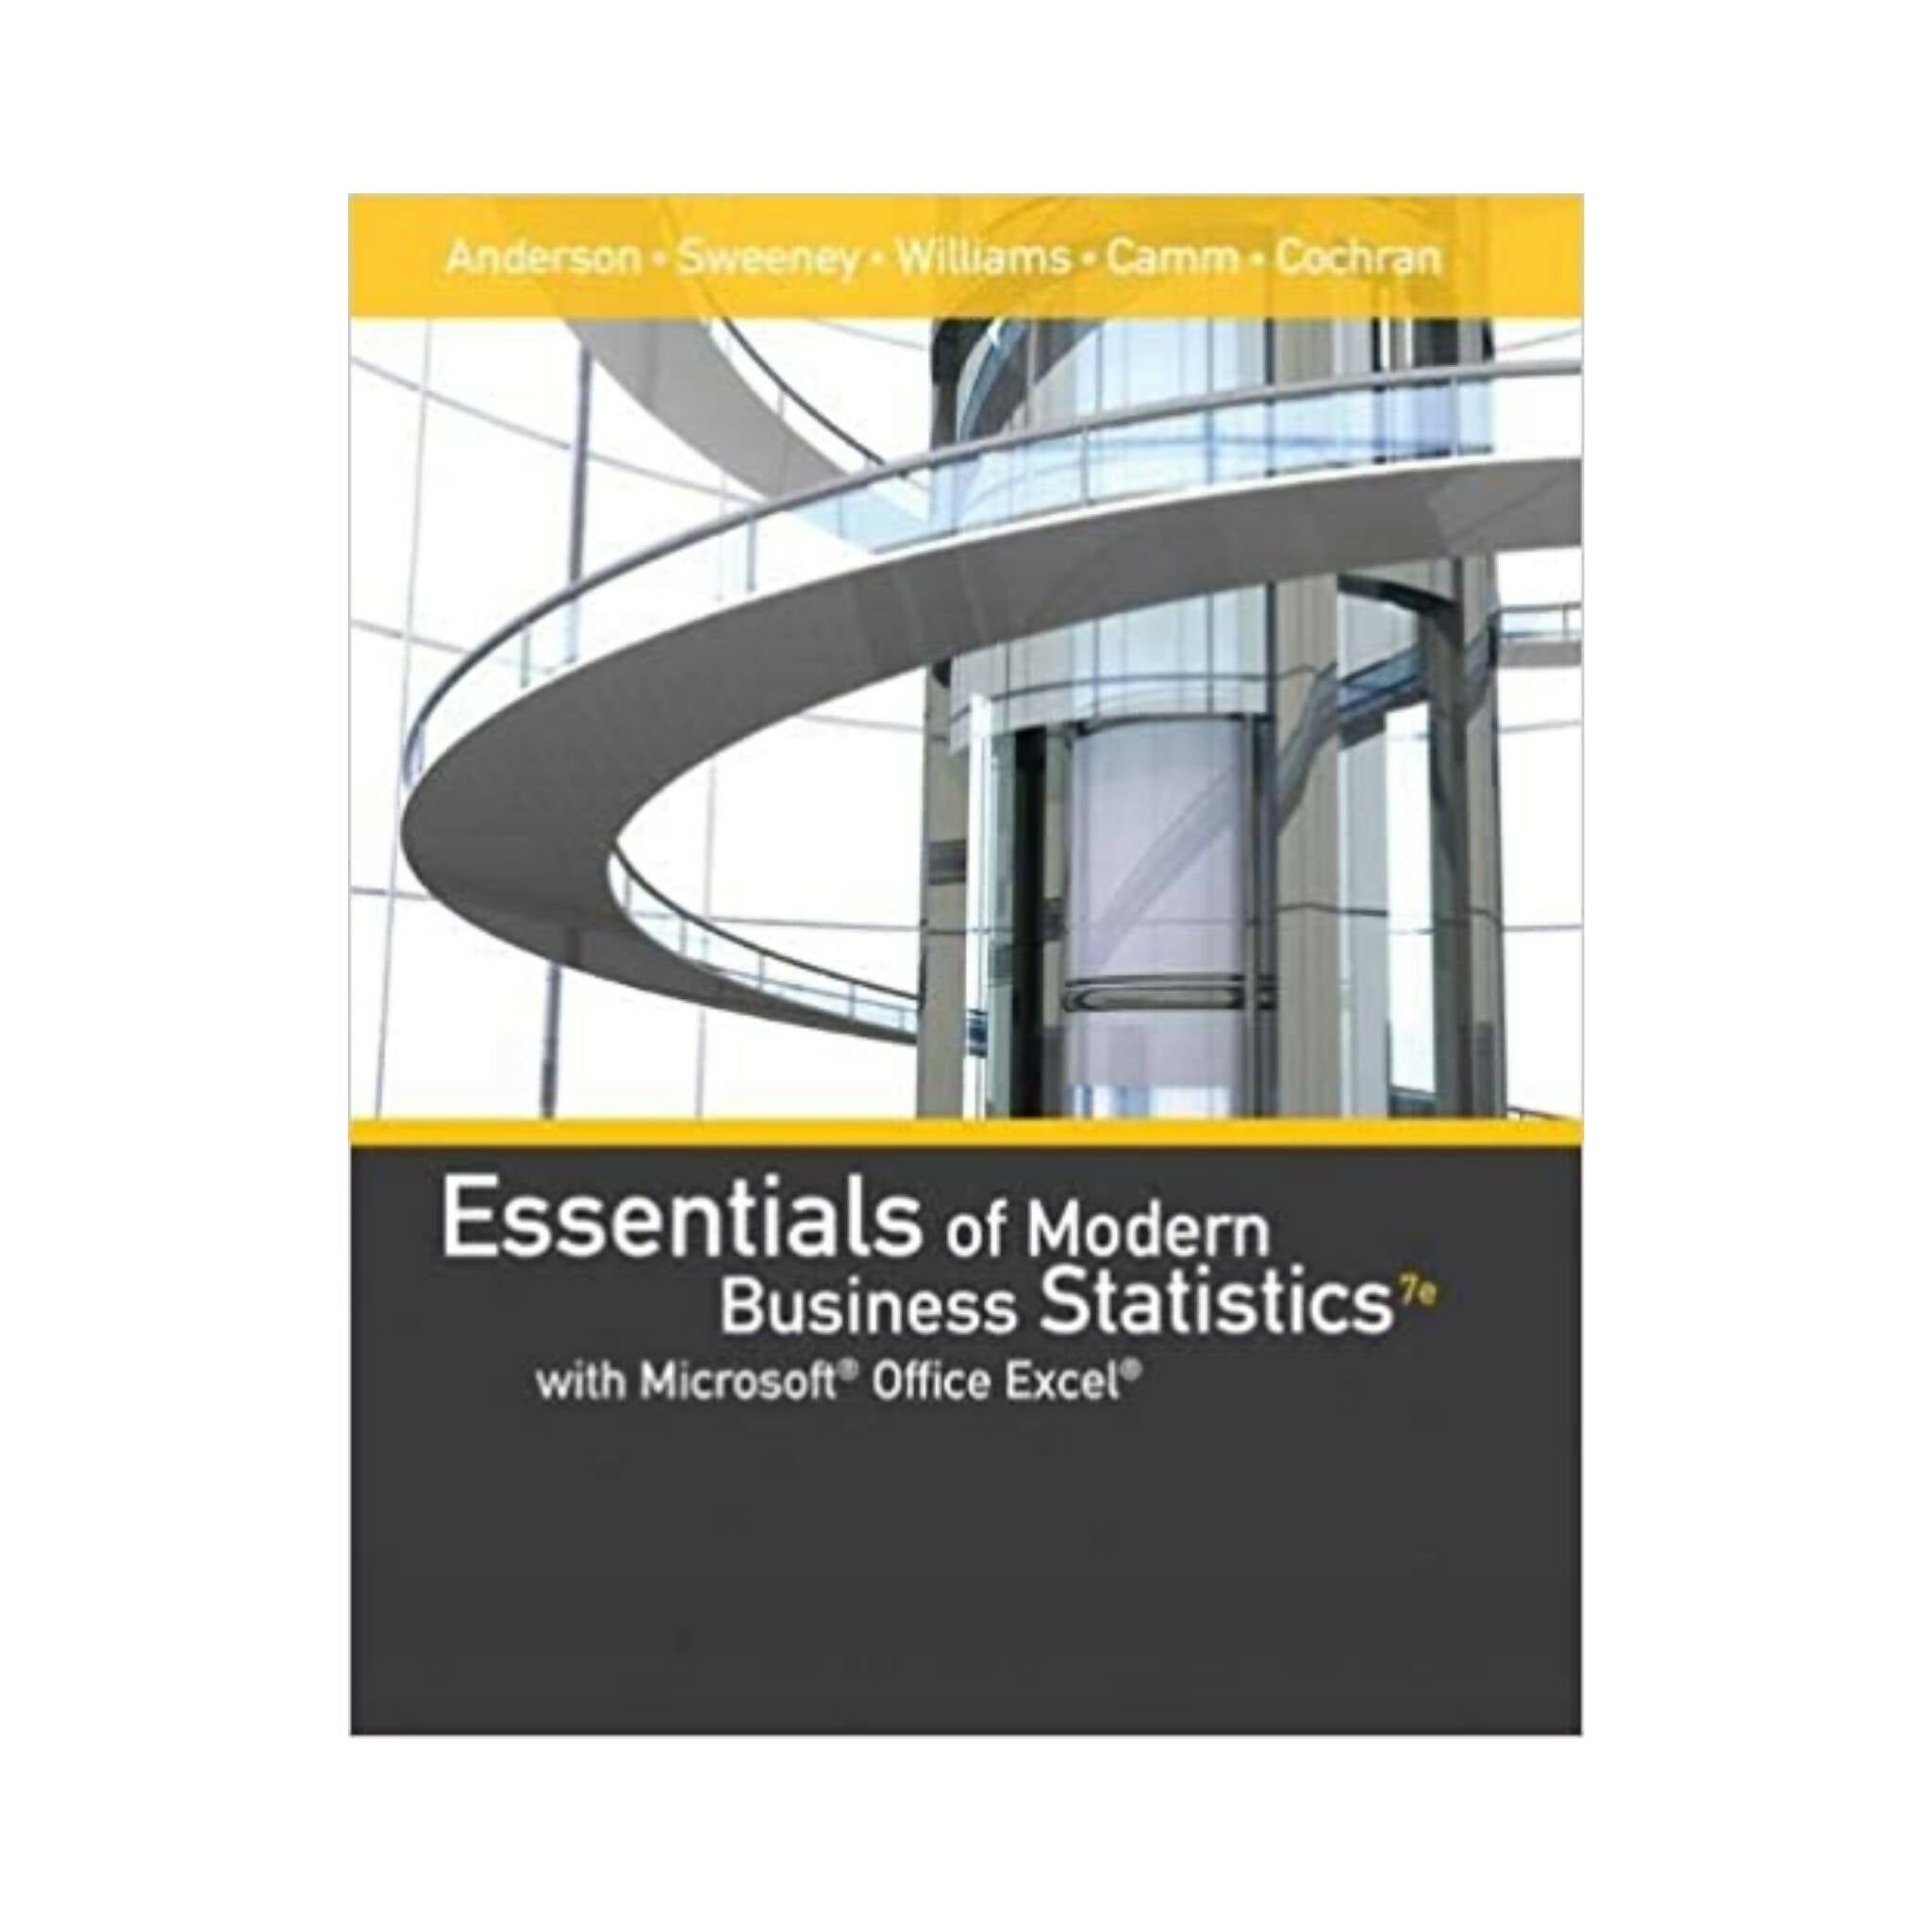 Book, Essentials of Modern Business Statistics with Microsoft Office Excel